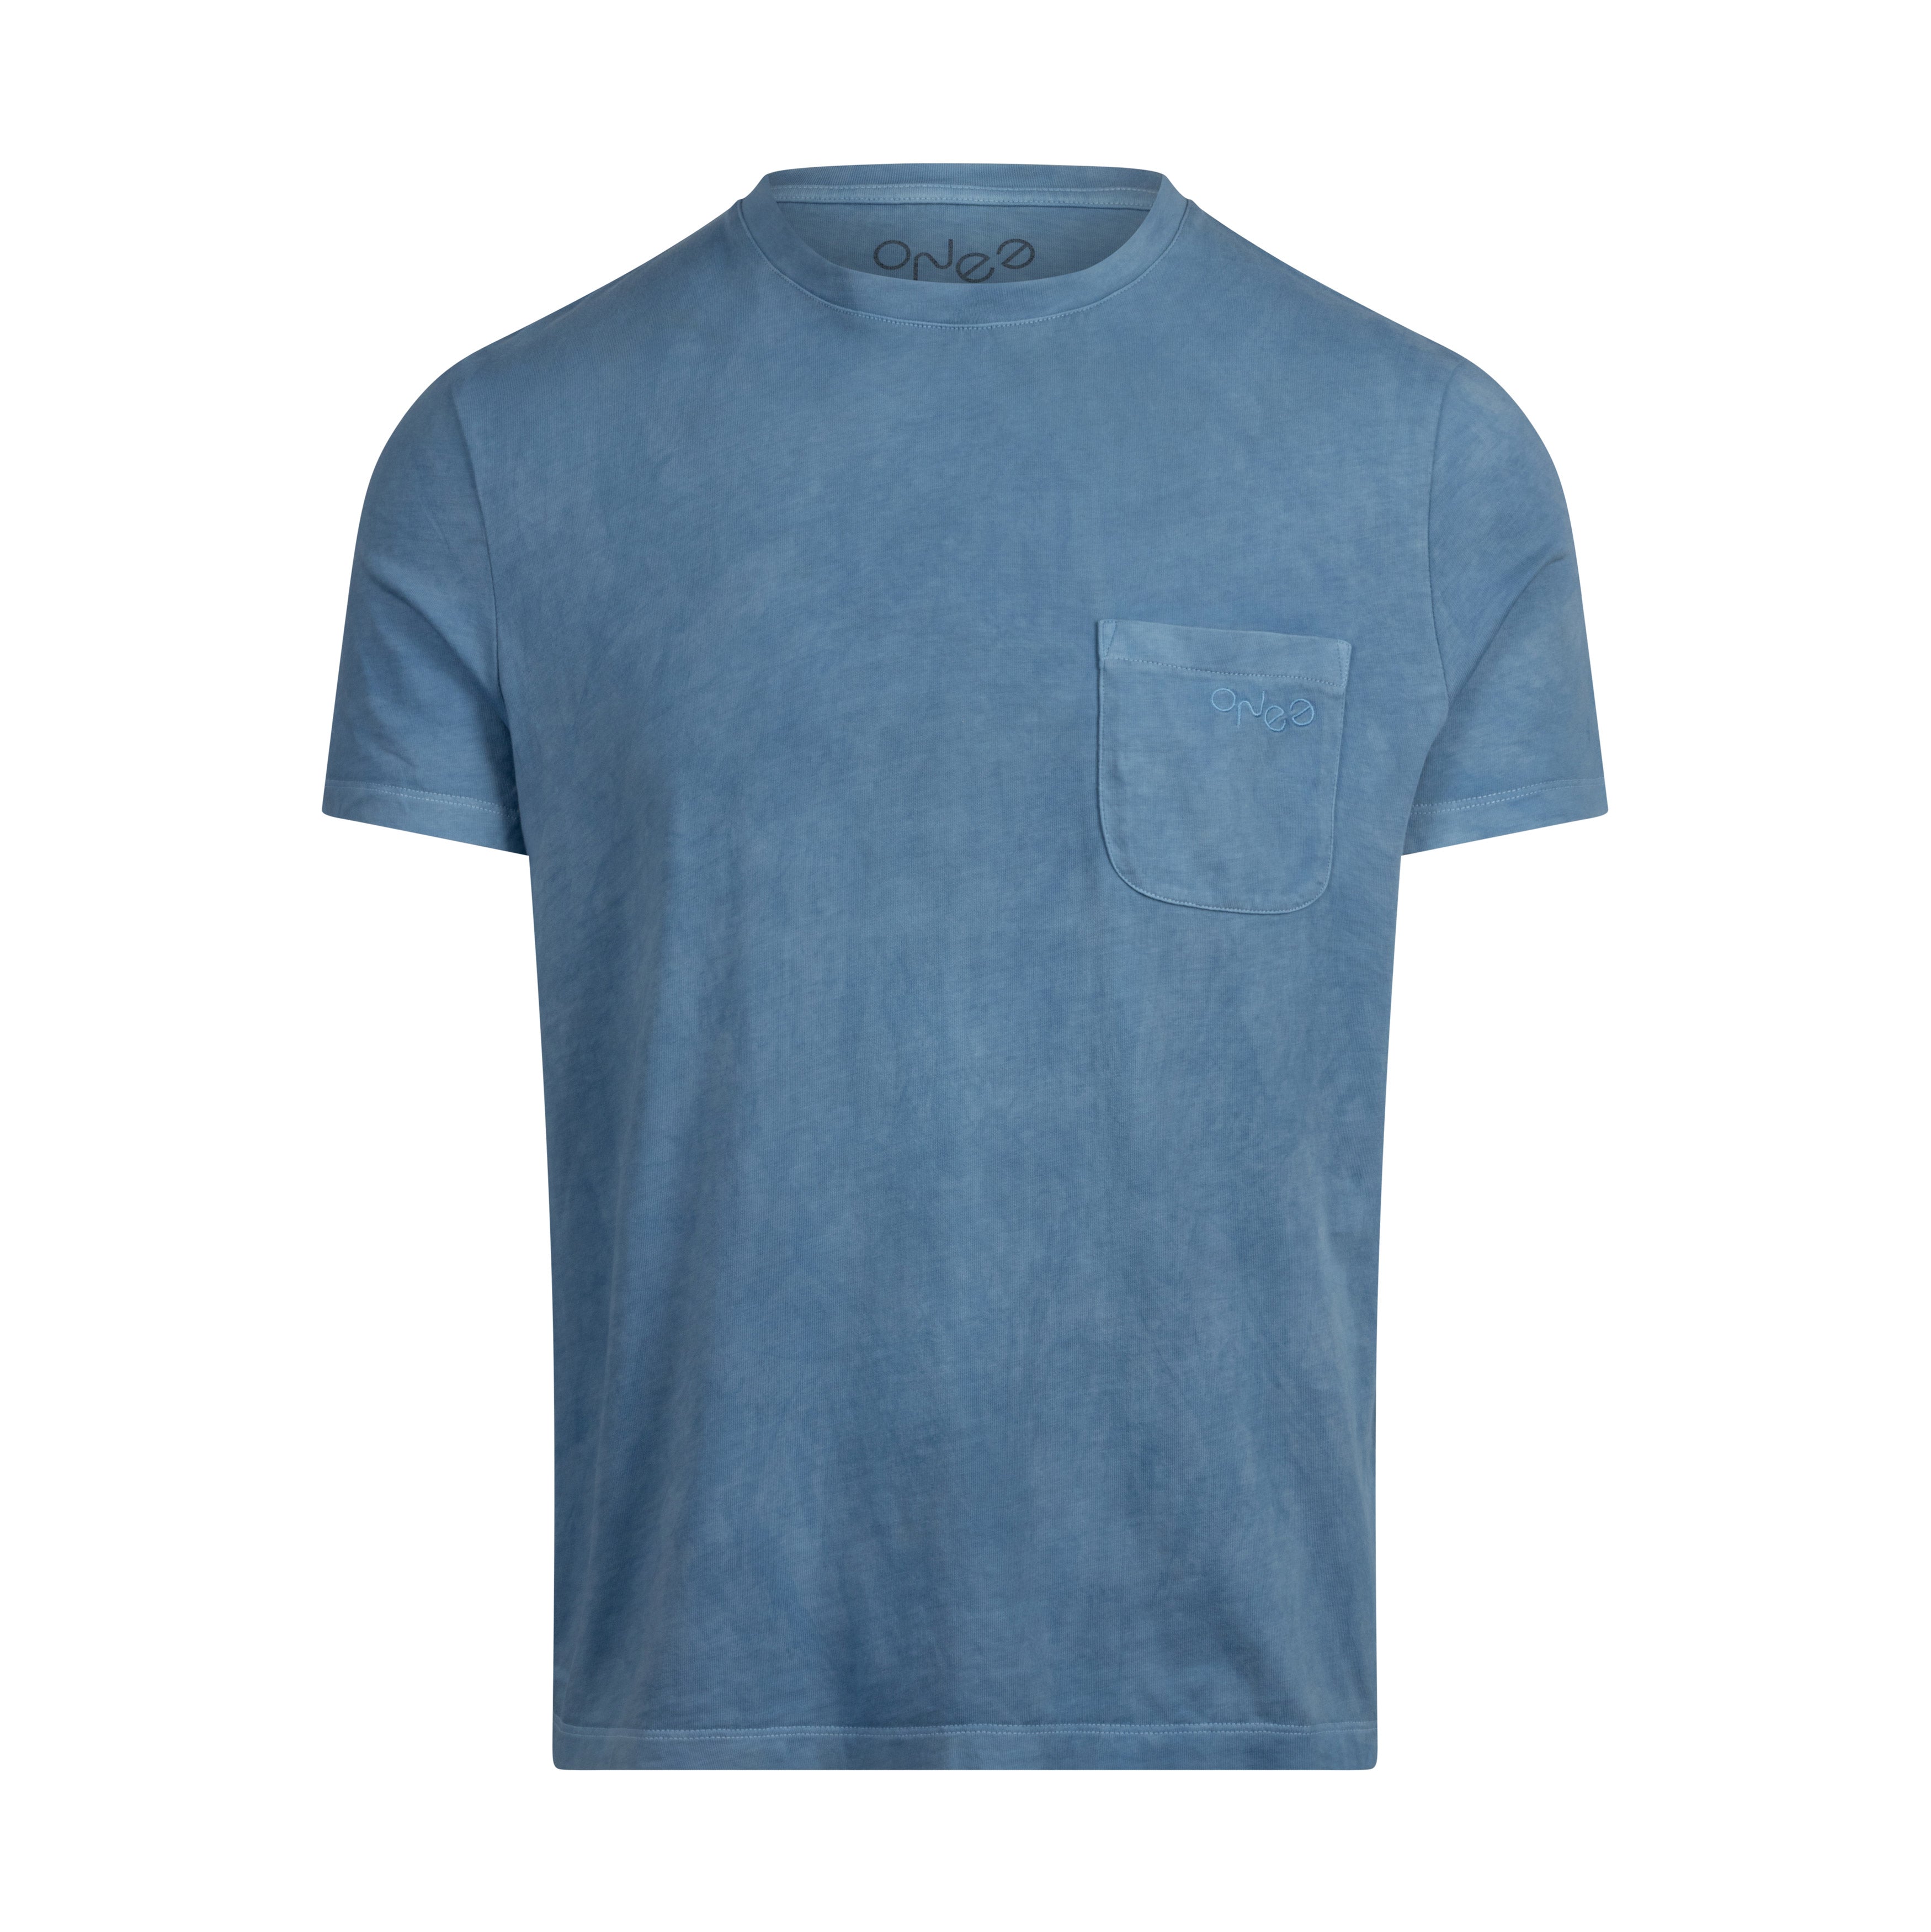 One Essentials unisex single-pocket t-shirt with pocket on left breast front